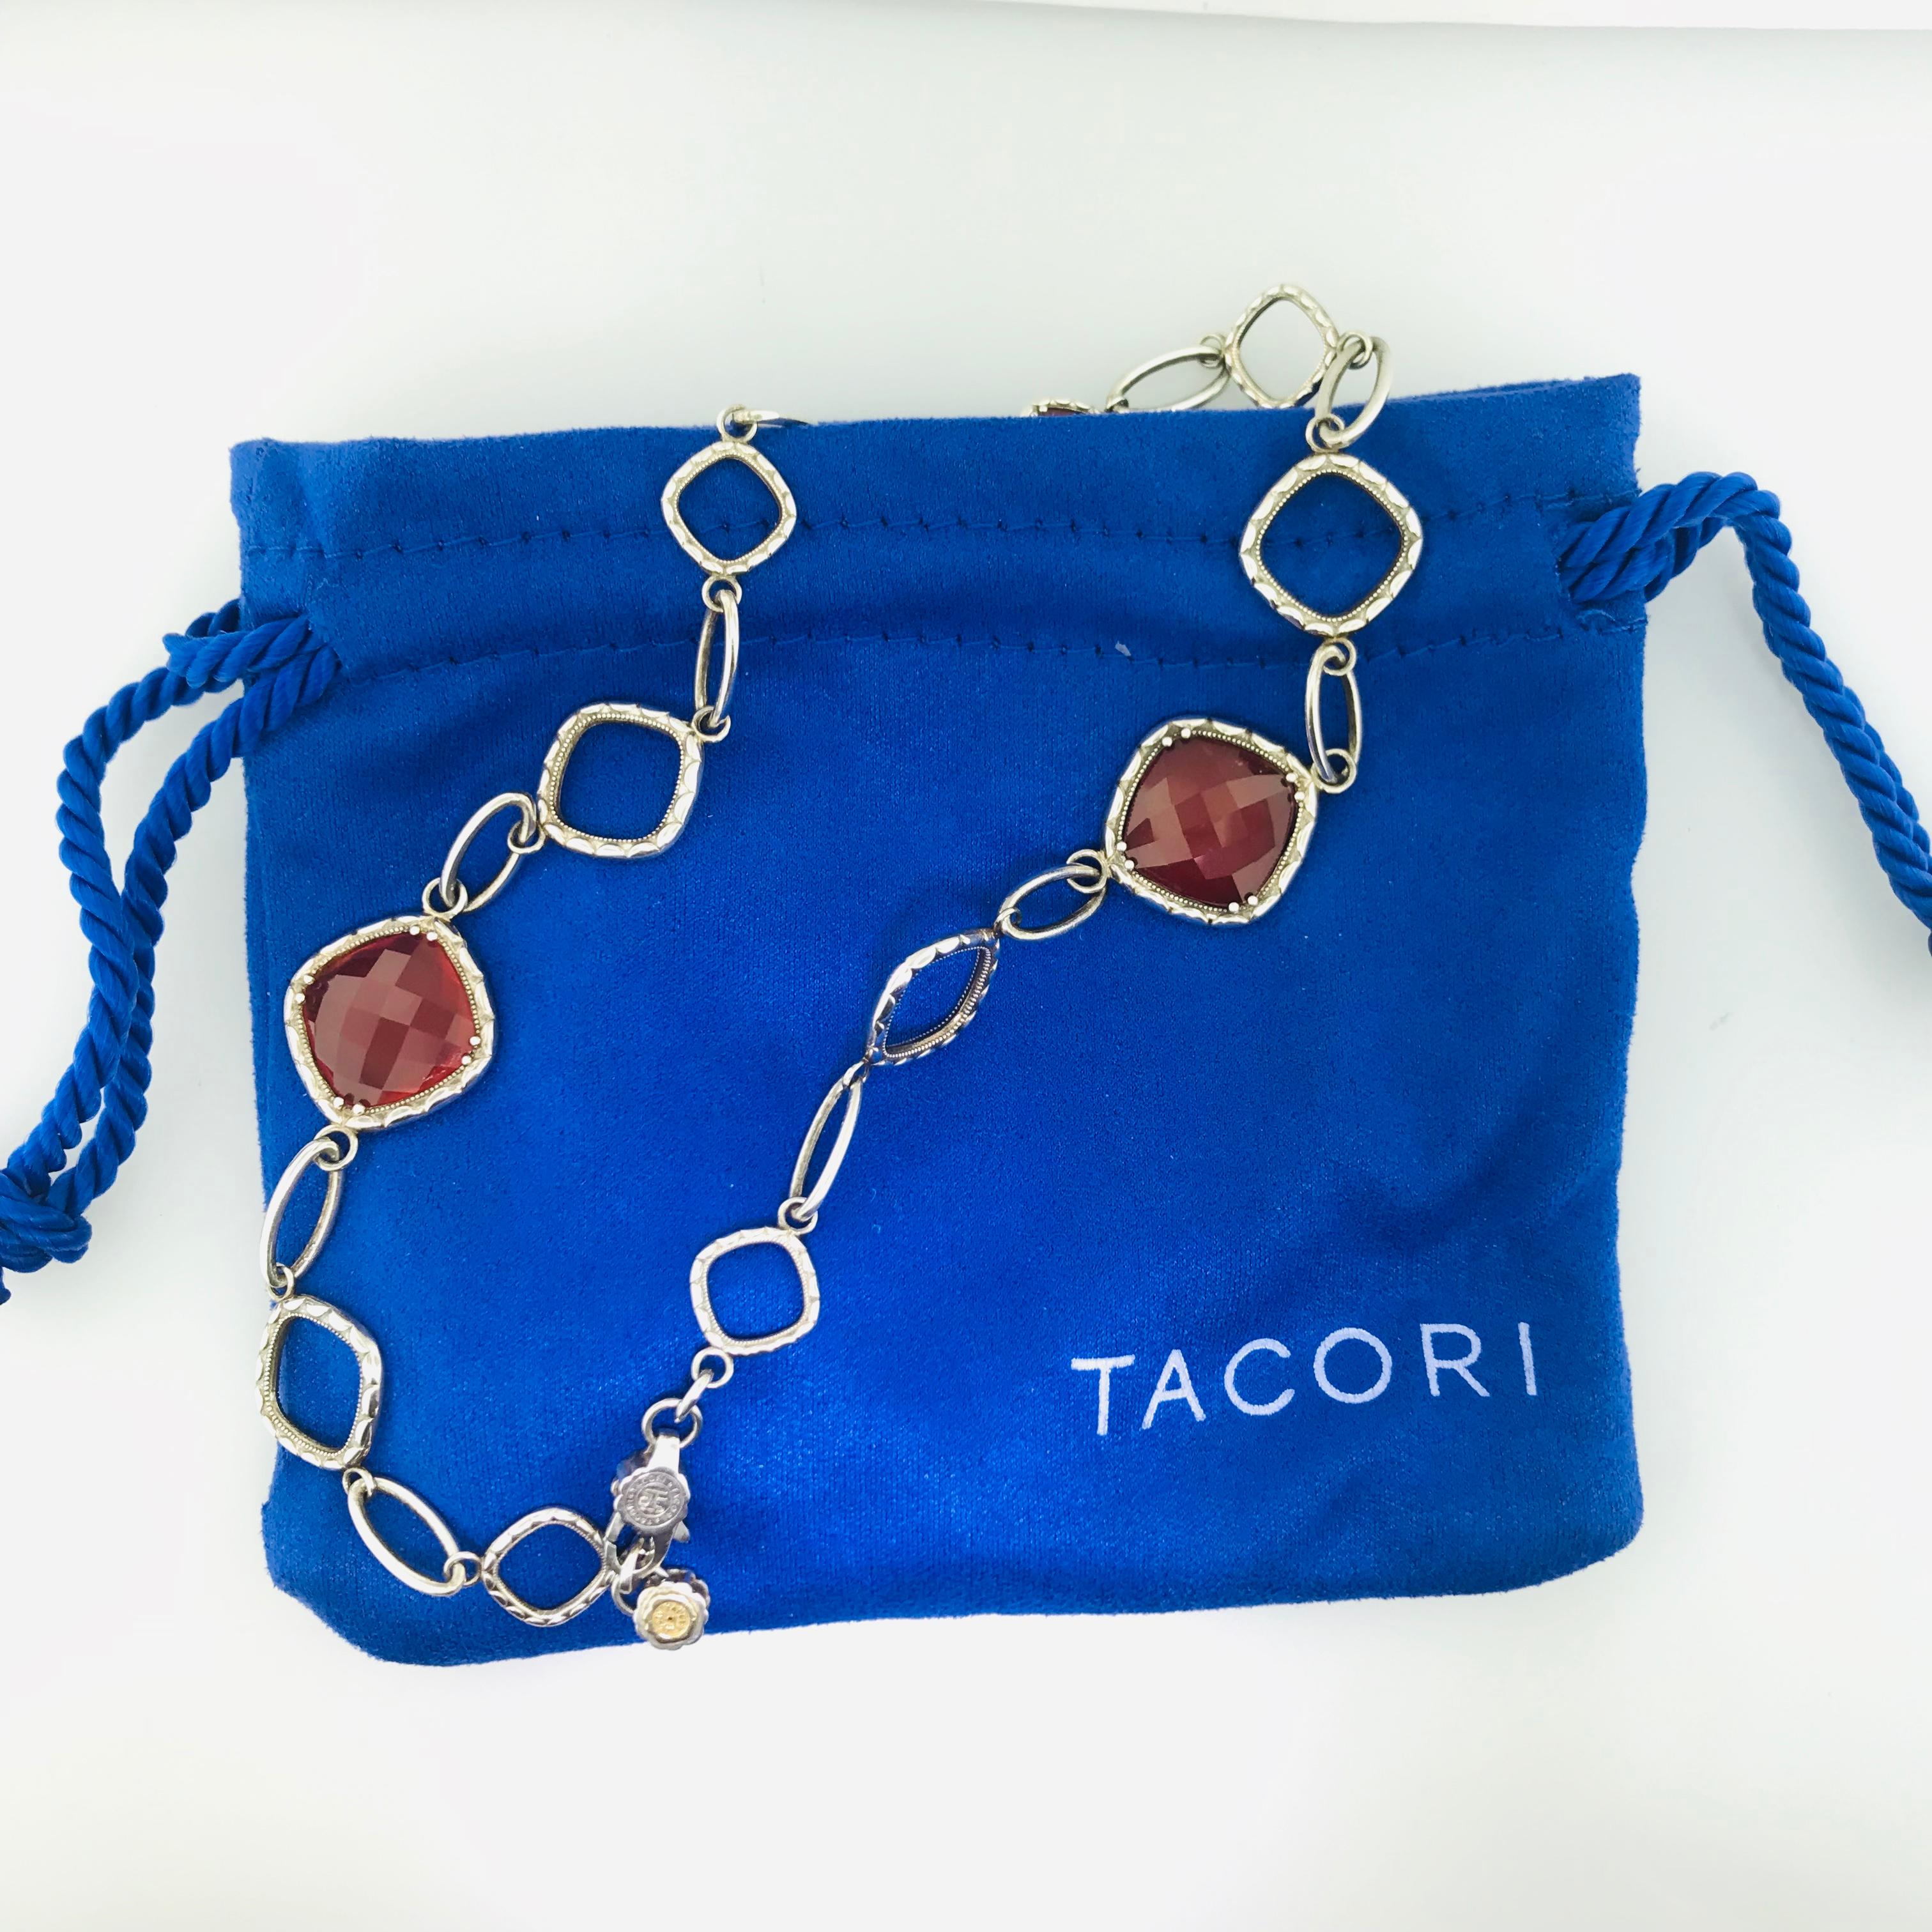 Original Rare Tacori Cascading Gem Necklace Featuring Clear Quartz over Red Onyx In New Condition For Sale In Austin, TX